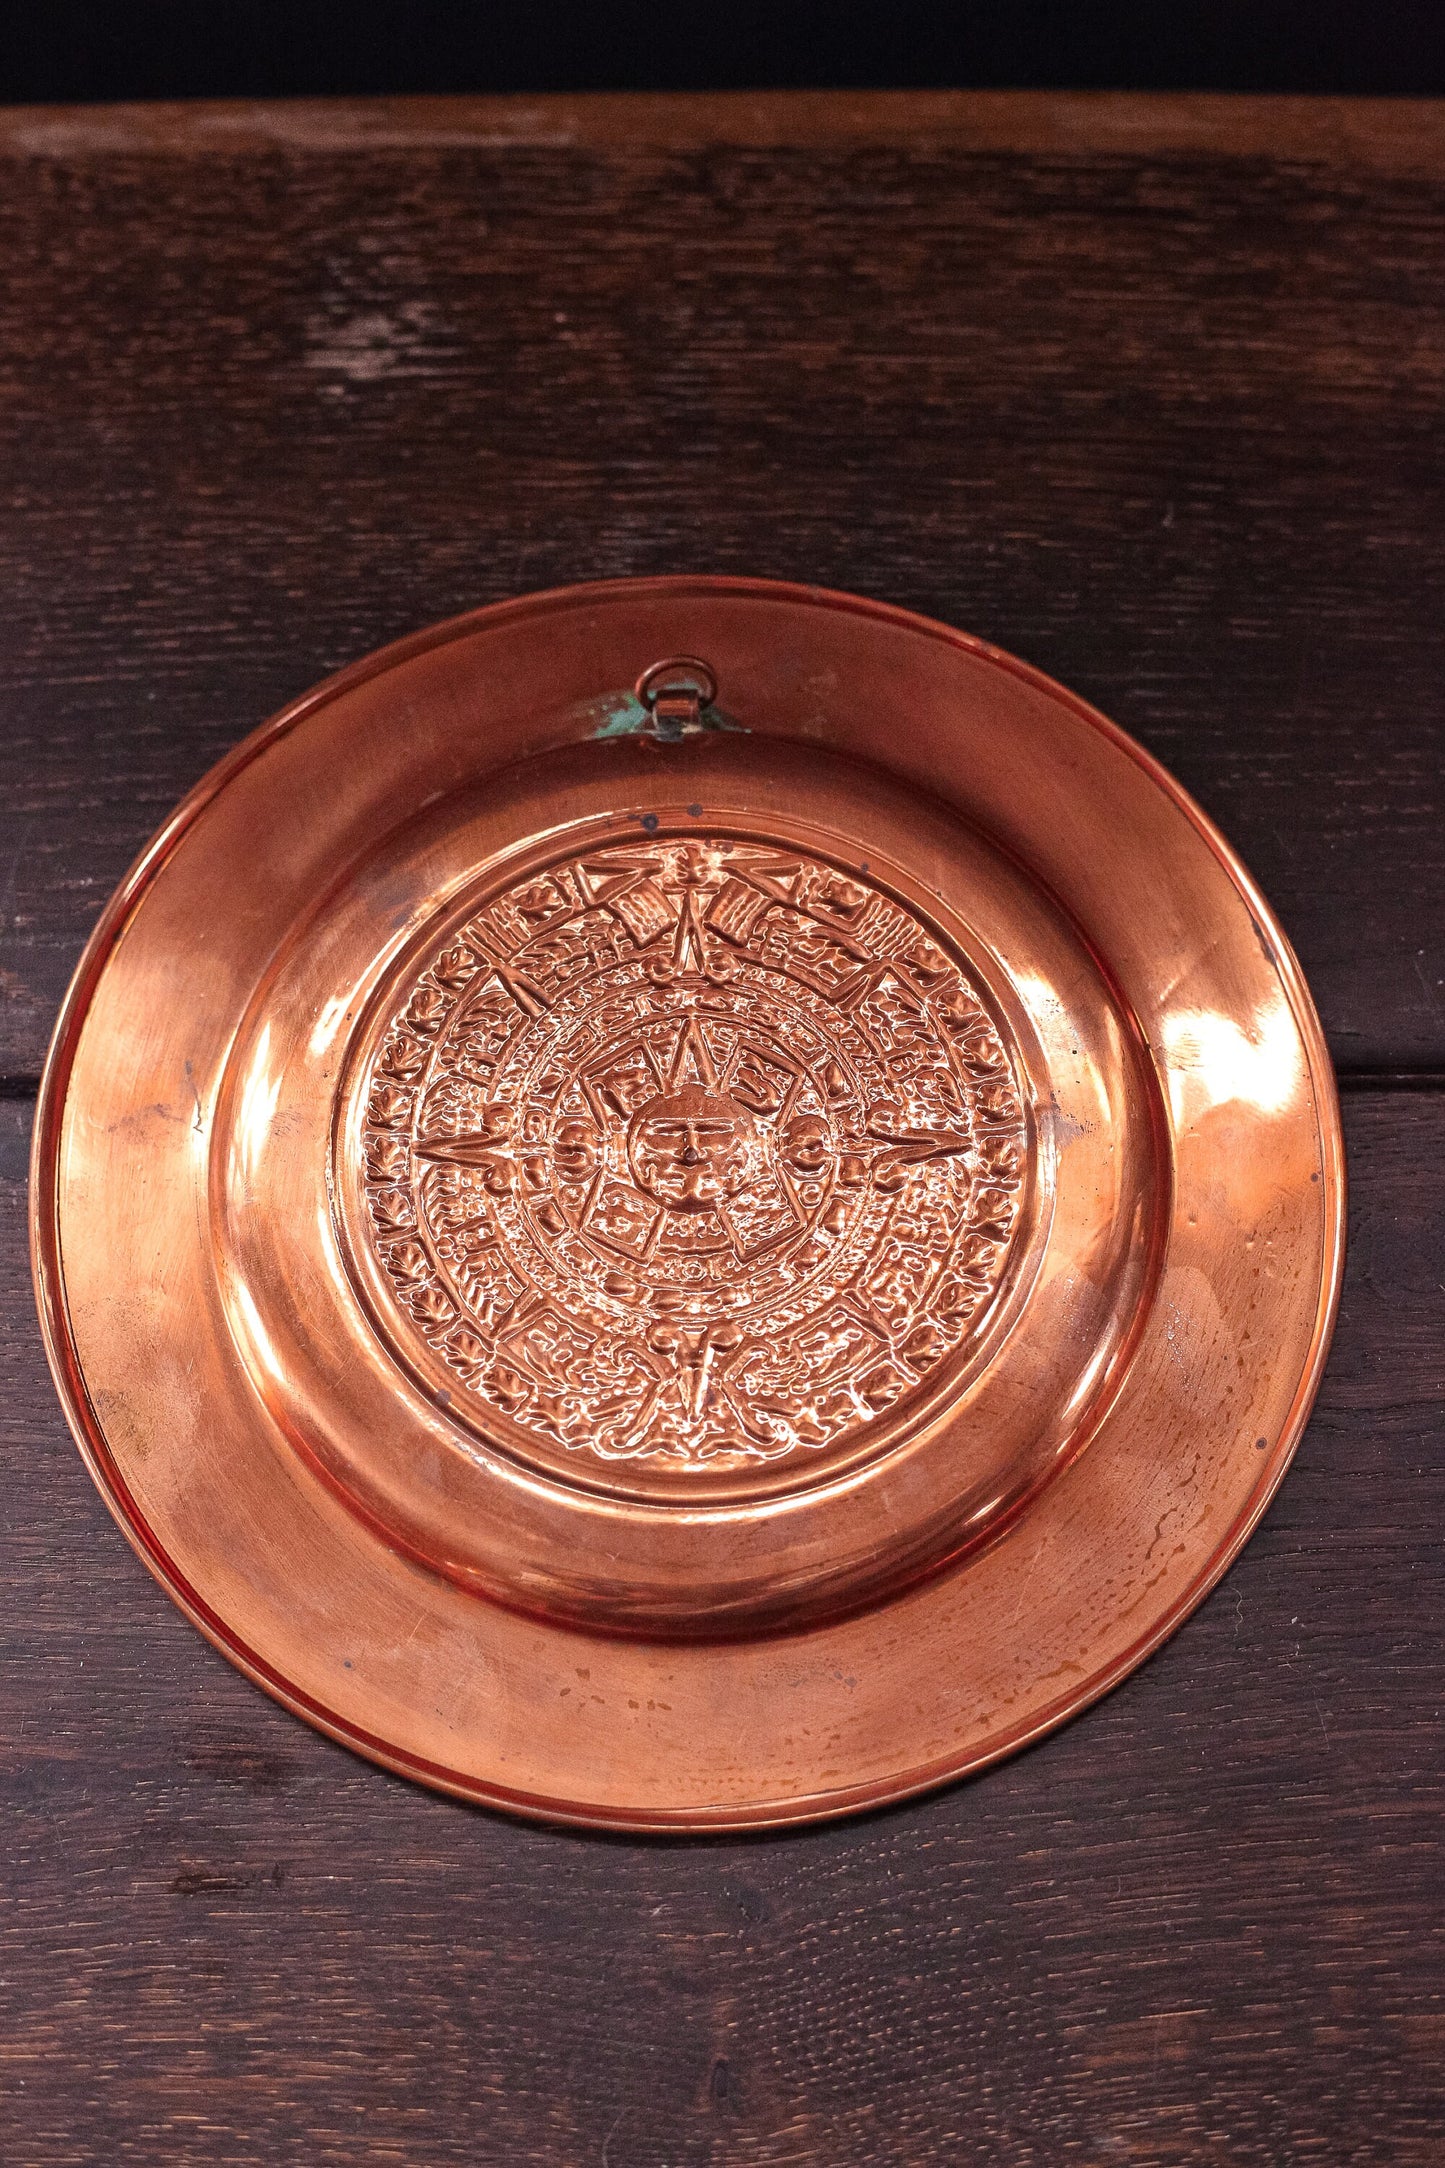 Vintage Mayan Motif Copper Wall Plate - Pressed Copper Wall Hanging